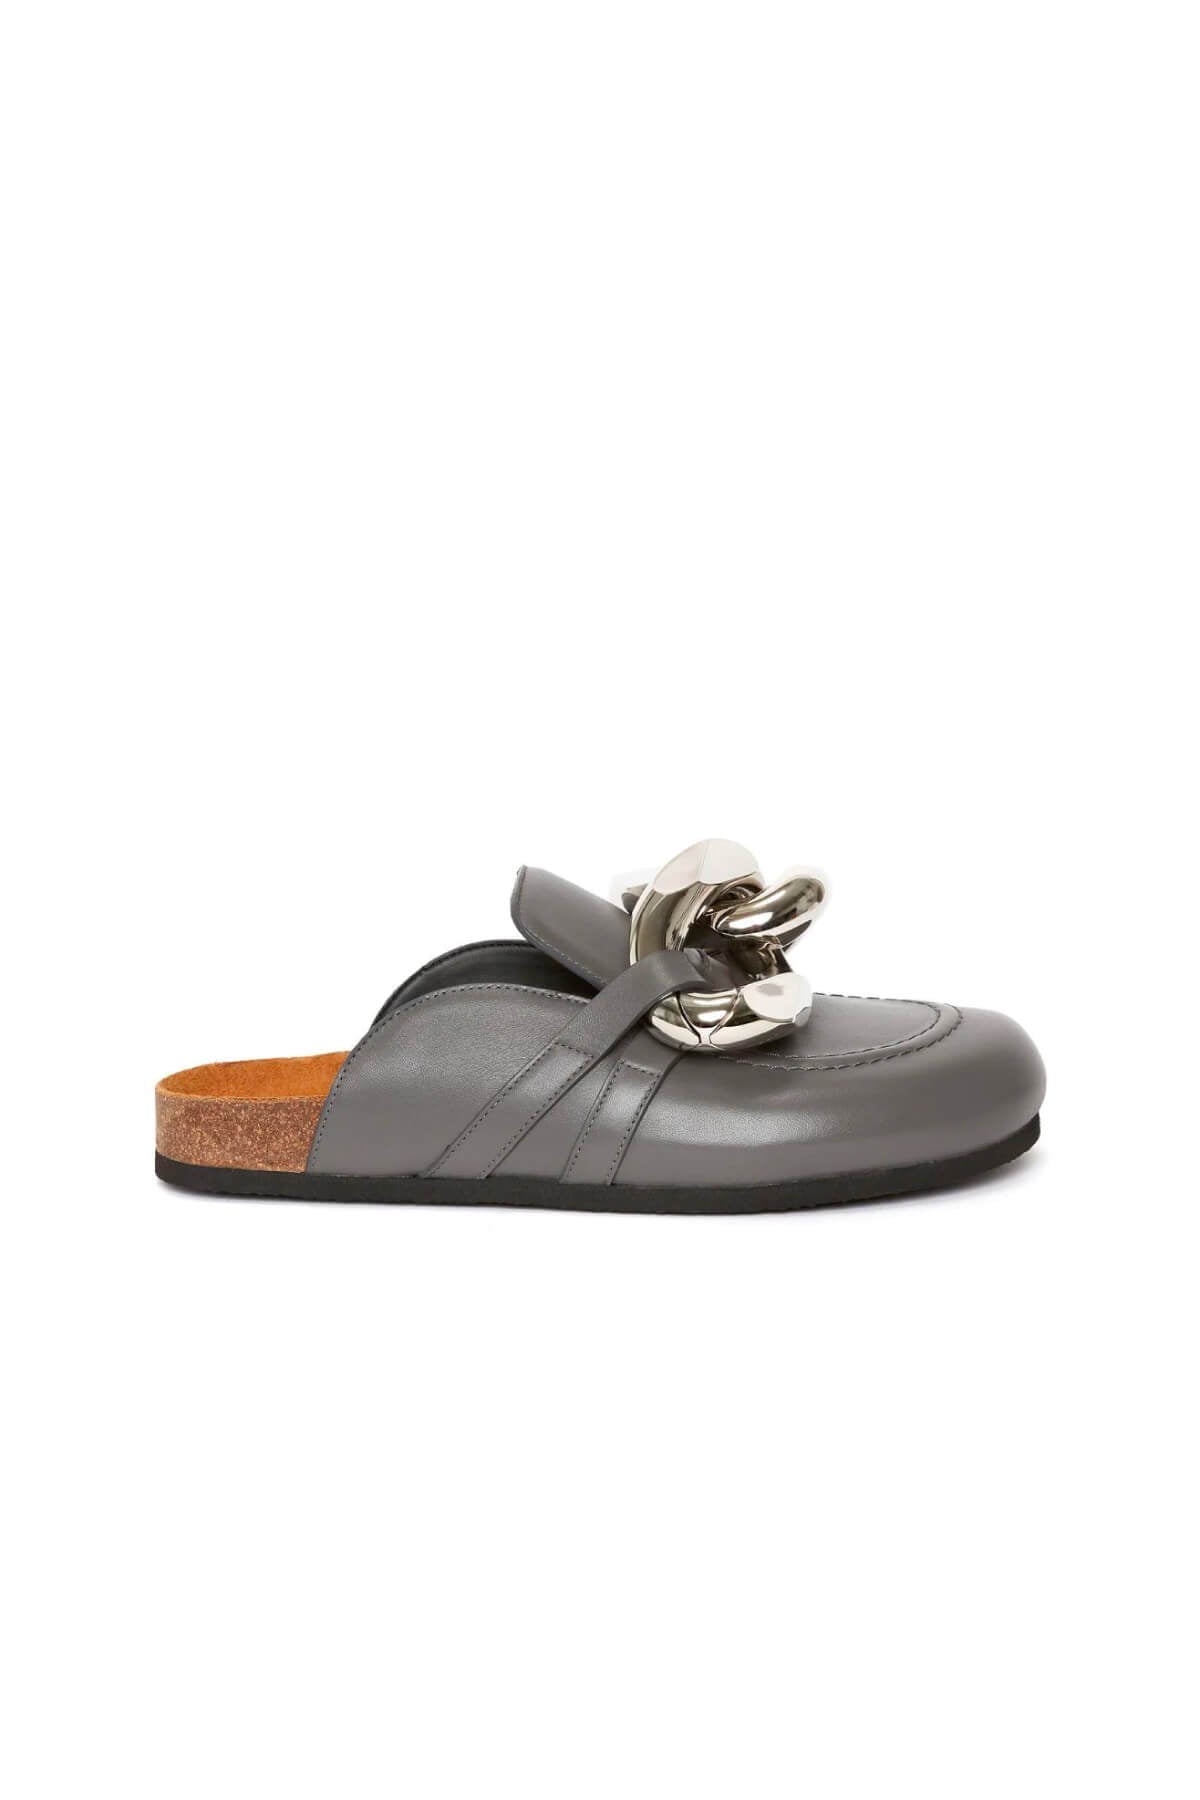 JW Anderson Chain Loafer Mules - Grey/ Silver